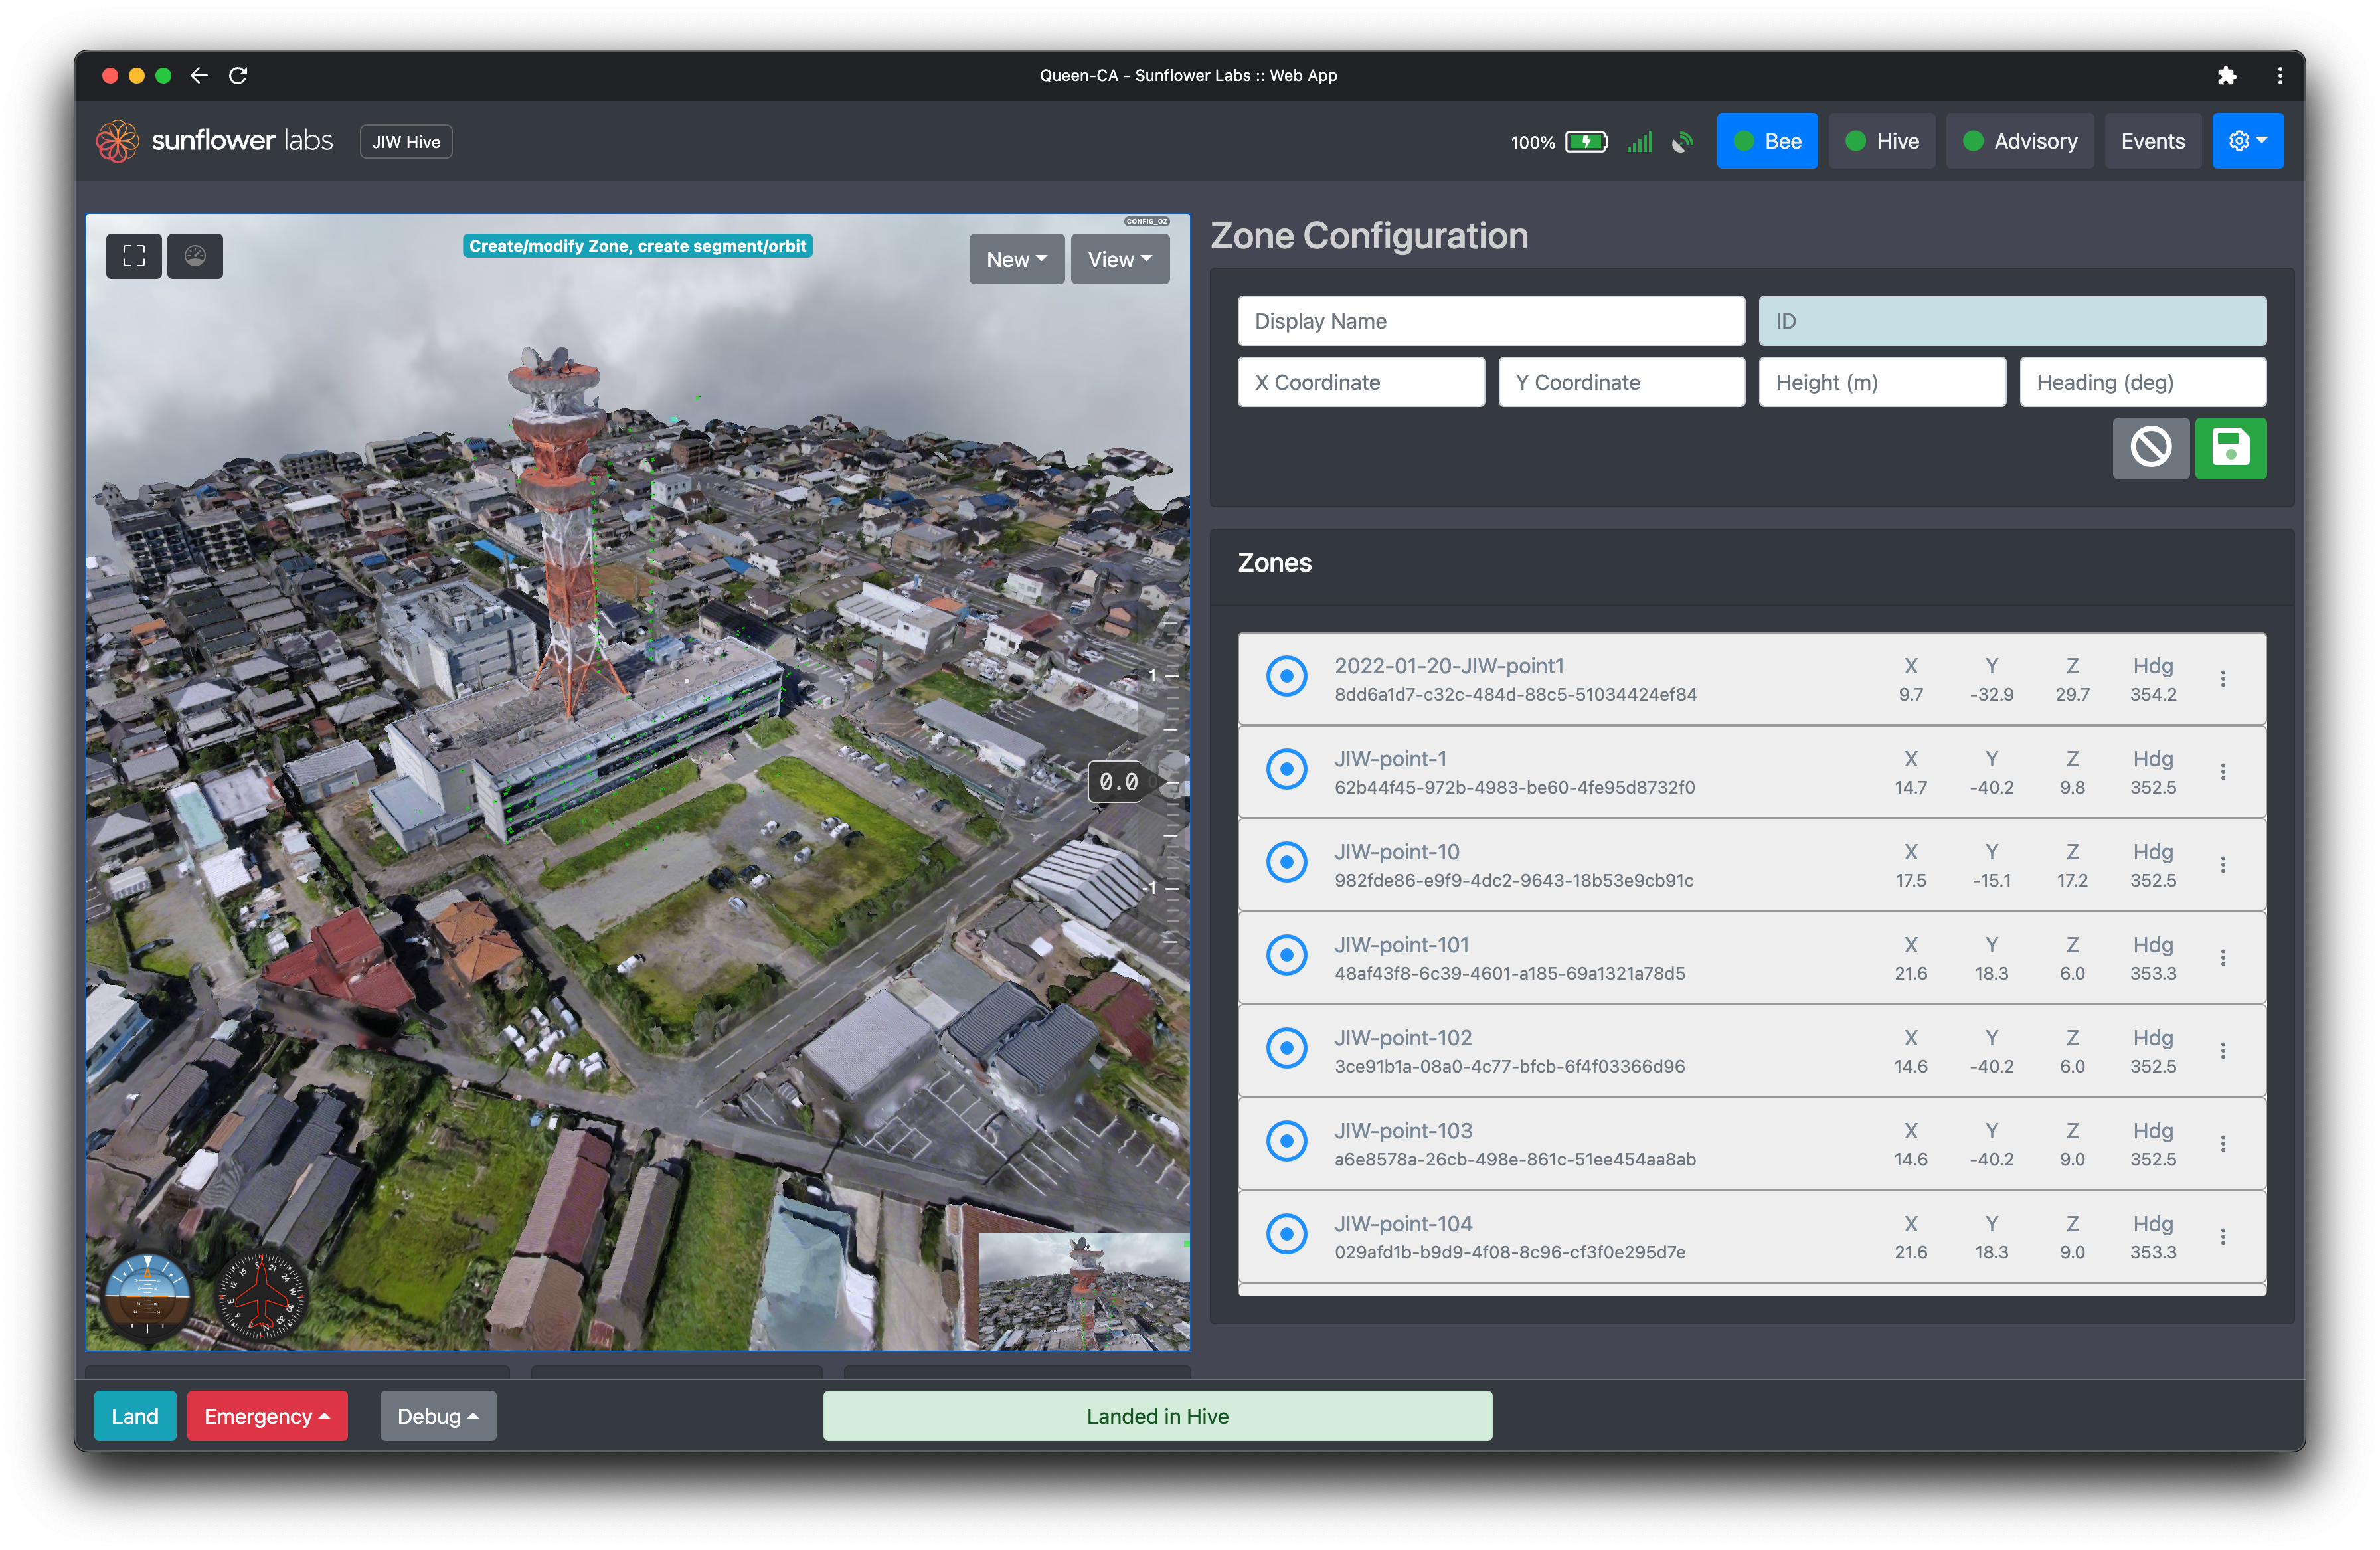 Sunflower Labs UI to configure drone inspections